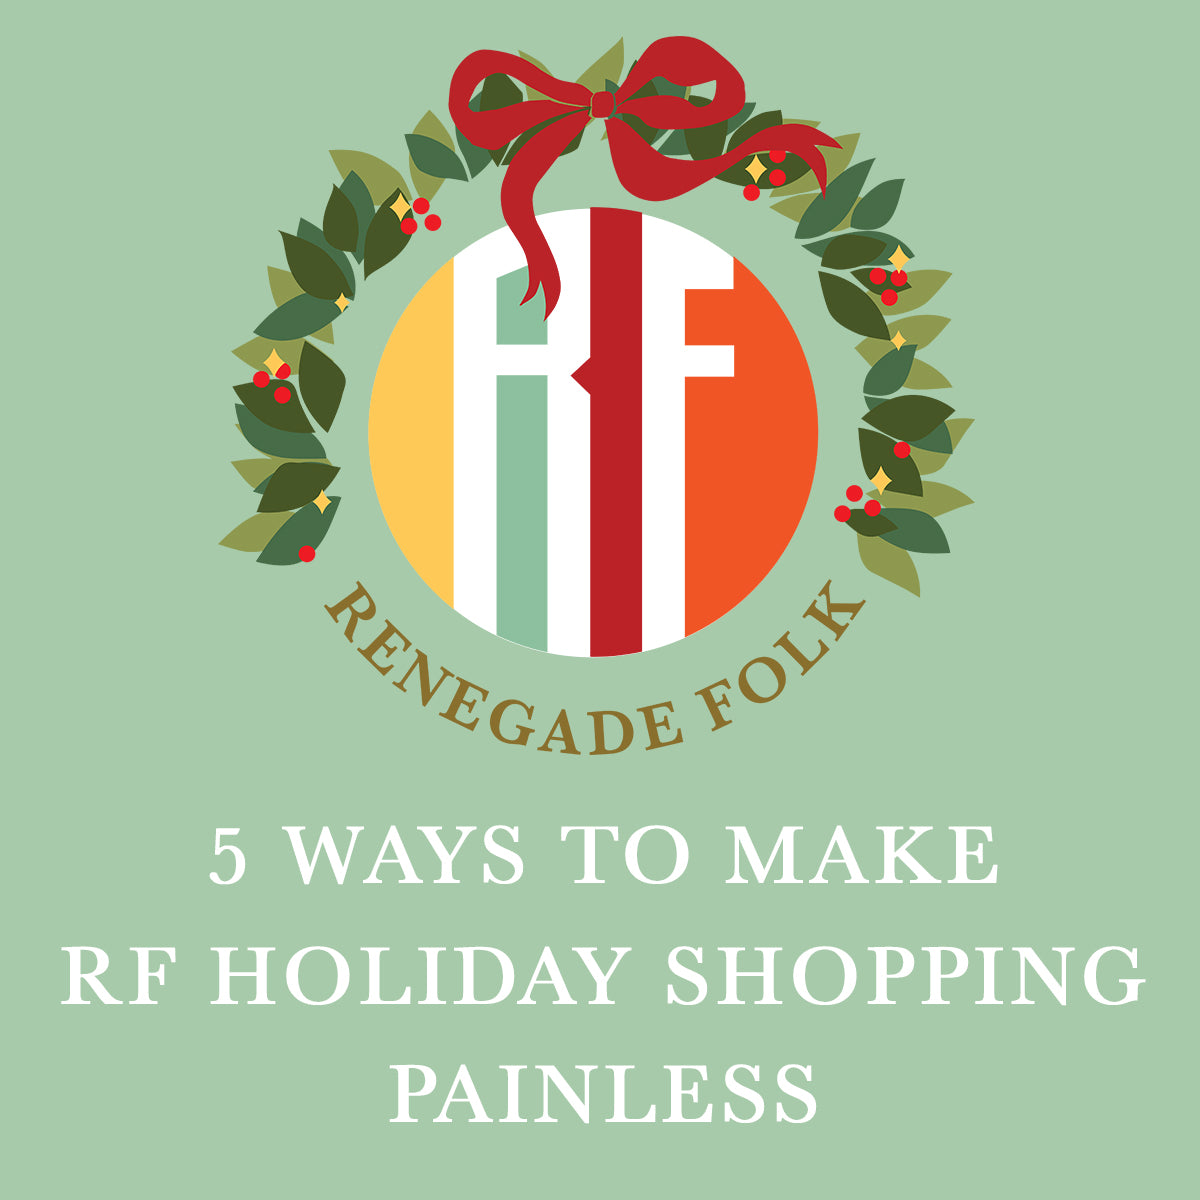 Five Ways to Make Holiday Shopping Painless